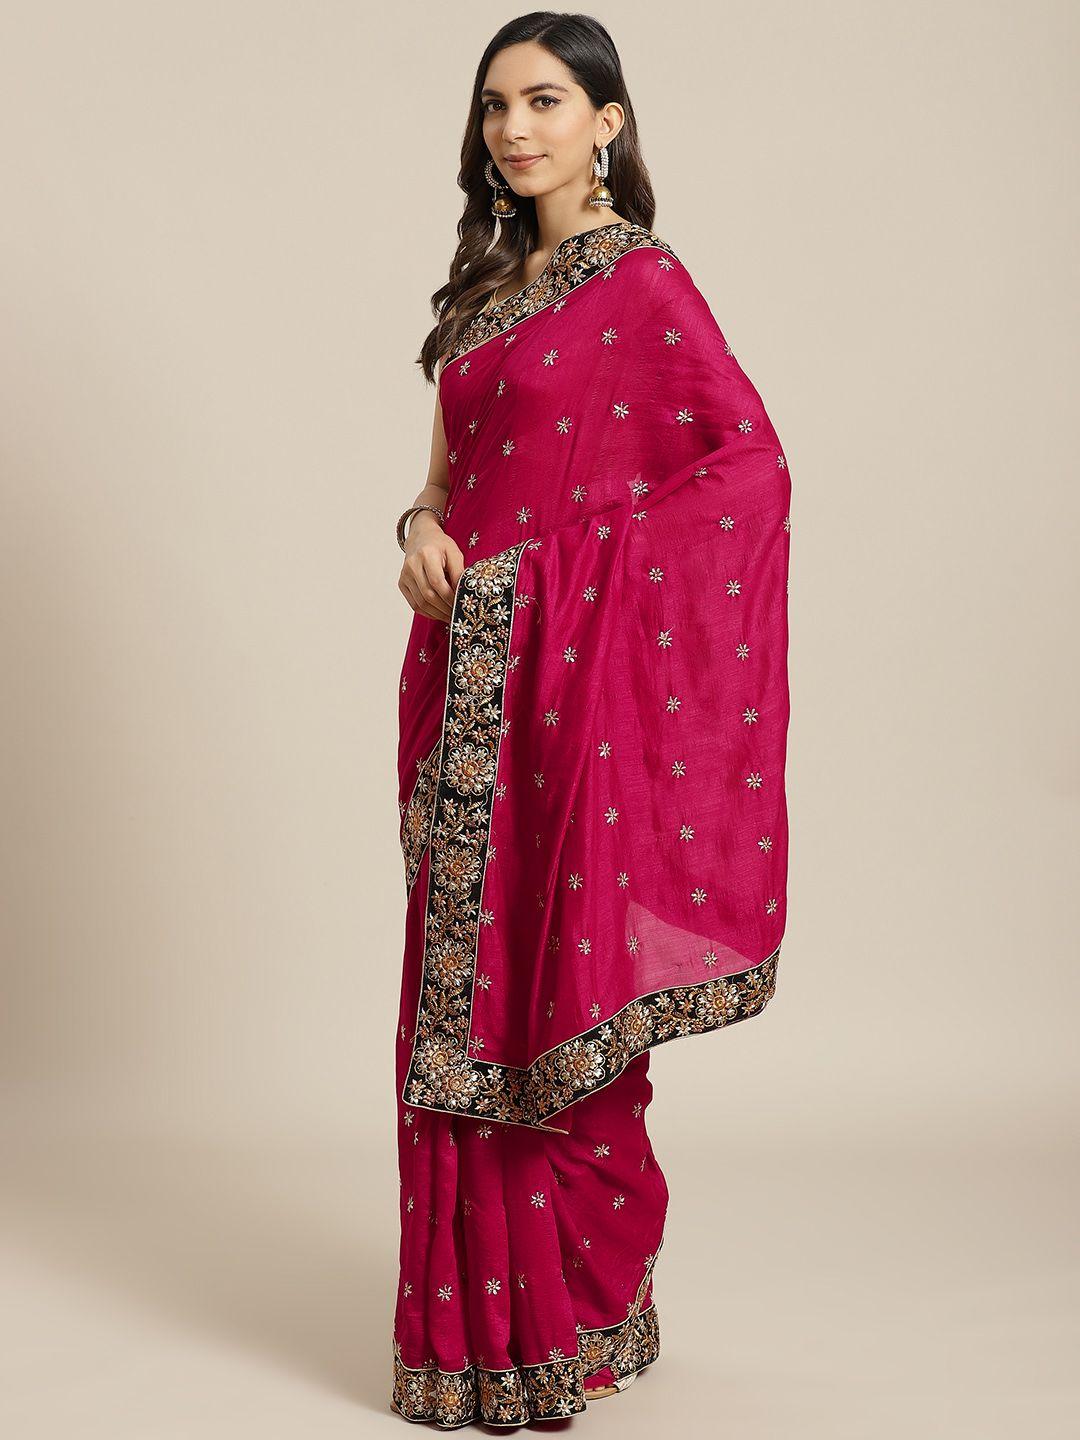 flaher pink & golden embroidered saree